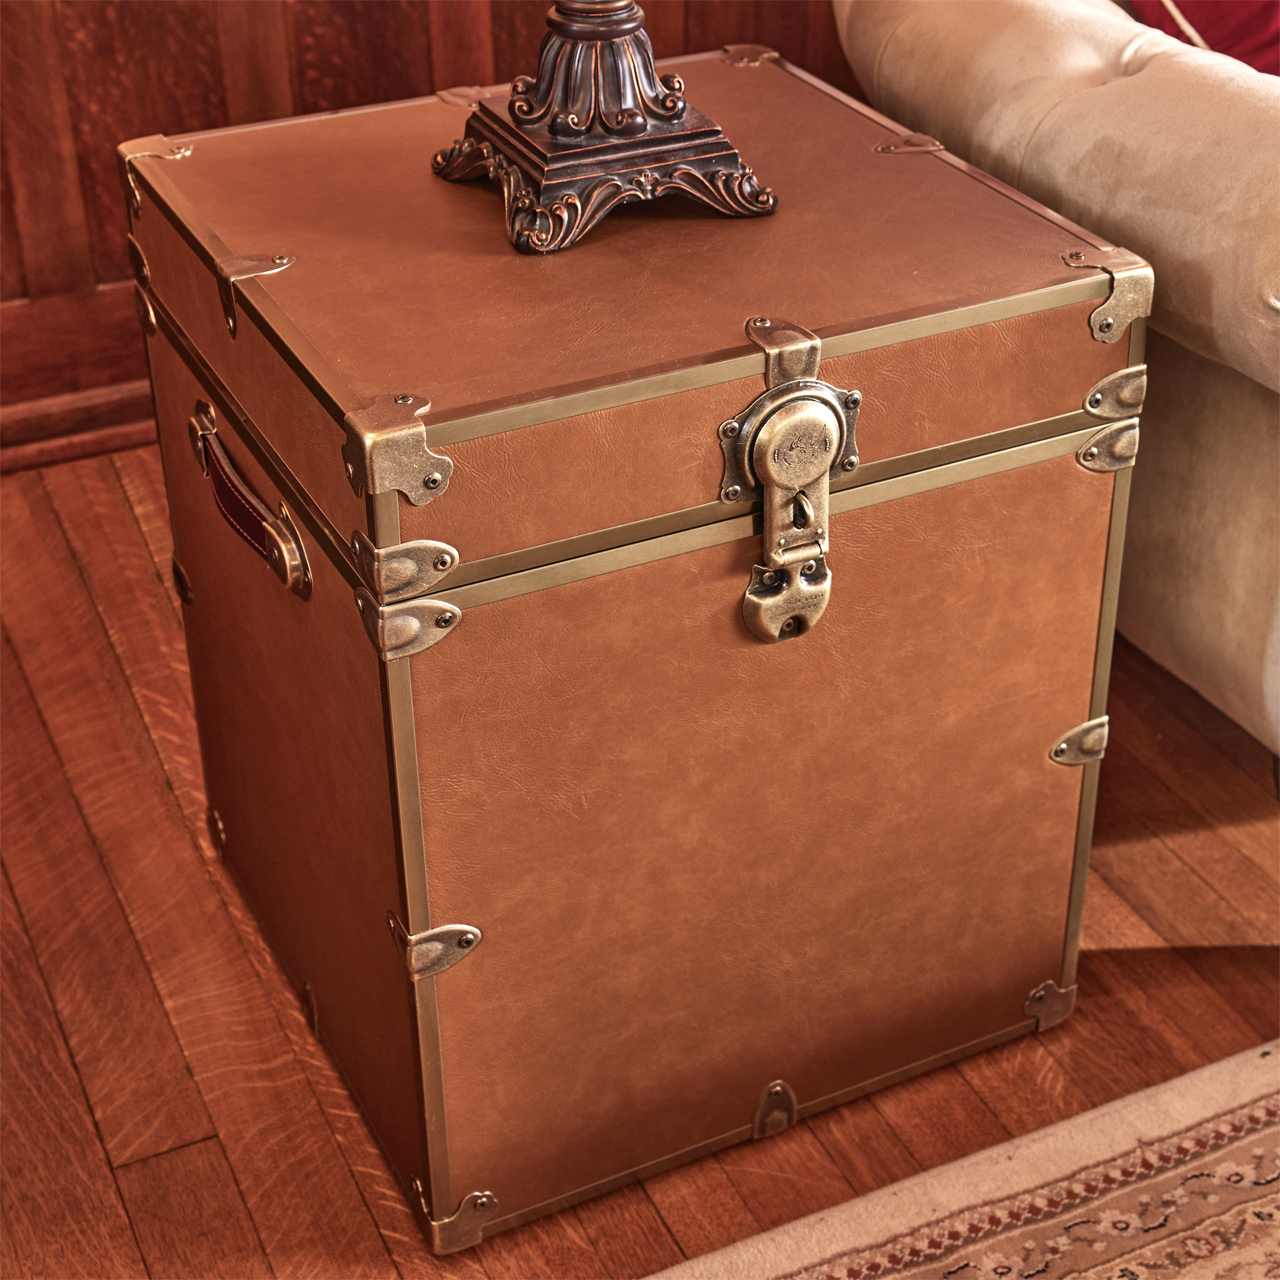 Rhino Luxury Faux Leather End Table Trunk with Feet